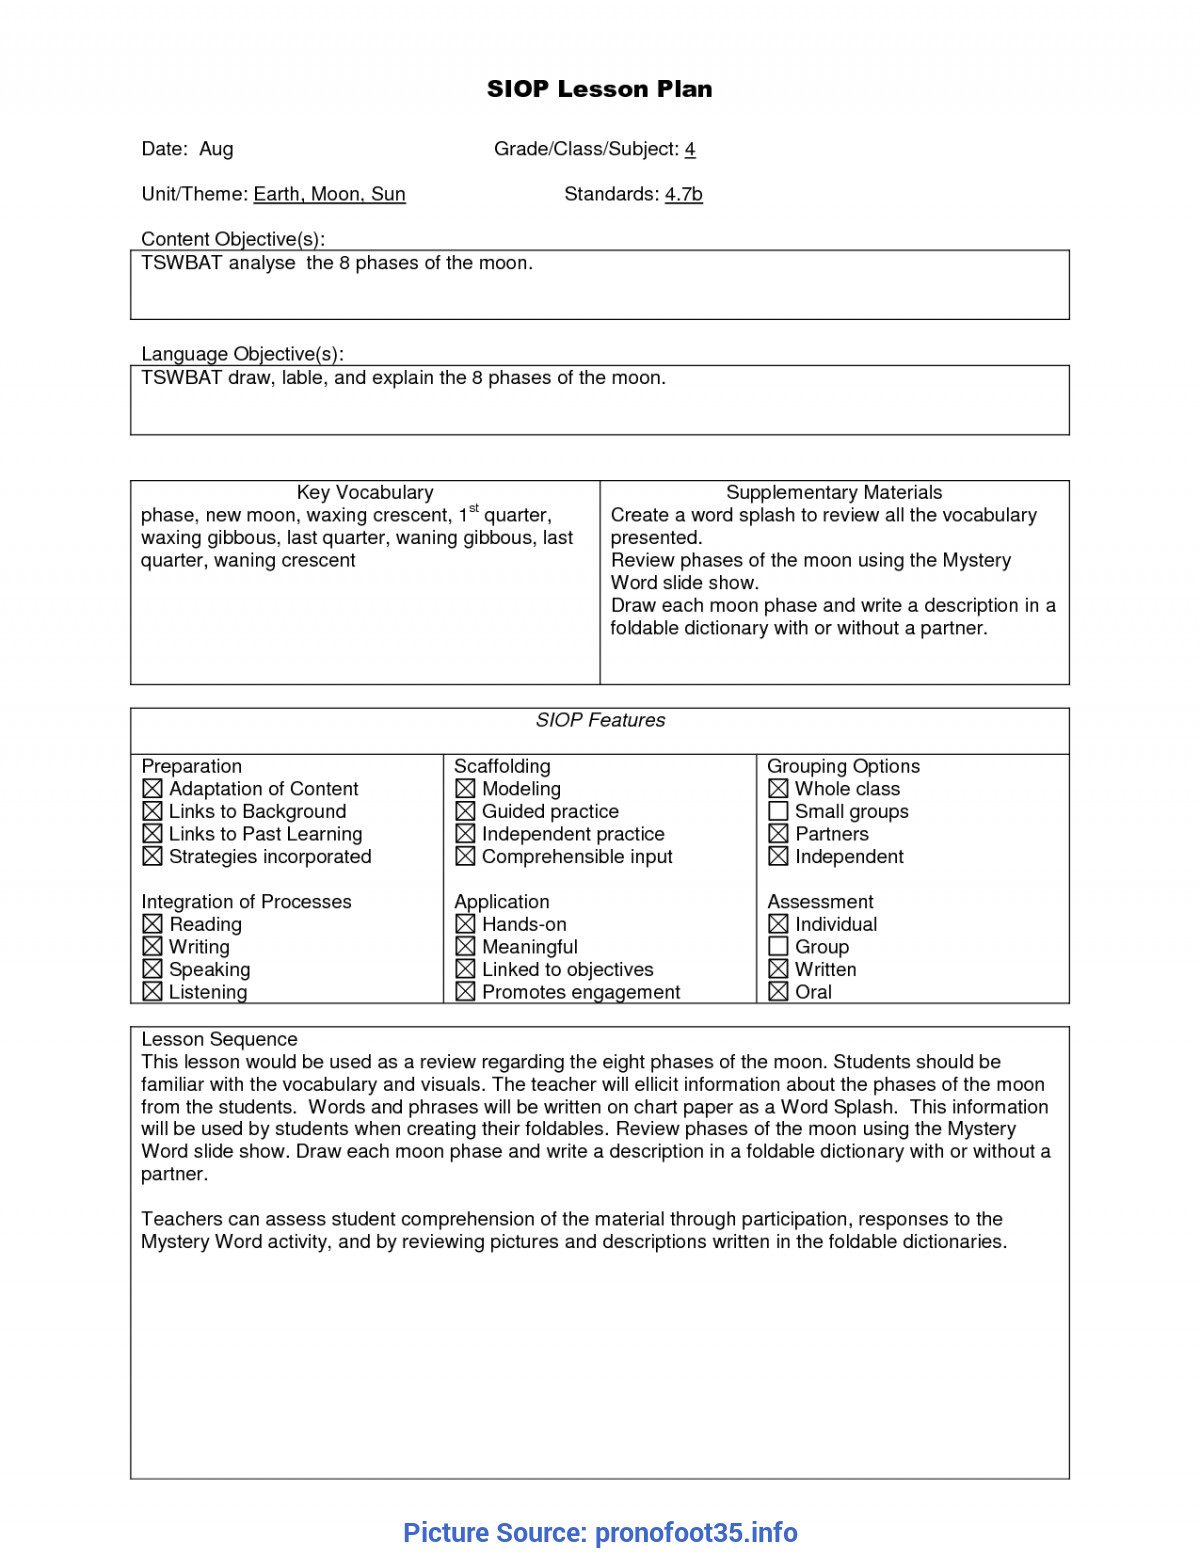 Siop Lesson Plan Template Best Lessons Learned Report Example Lessons Learned